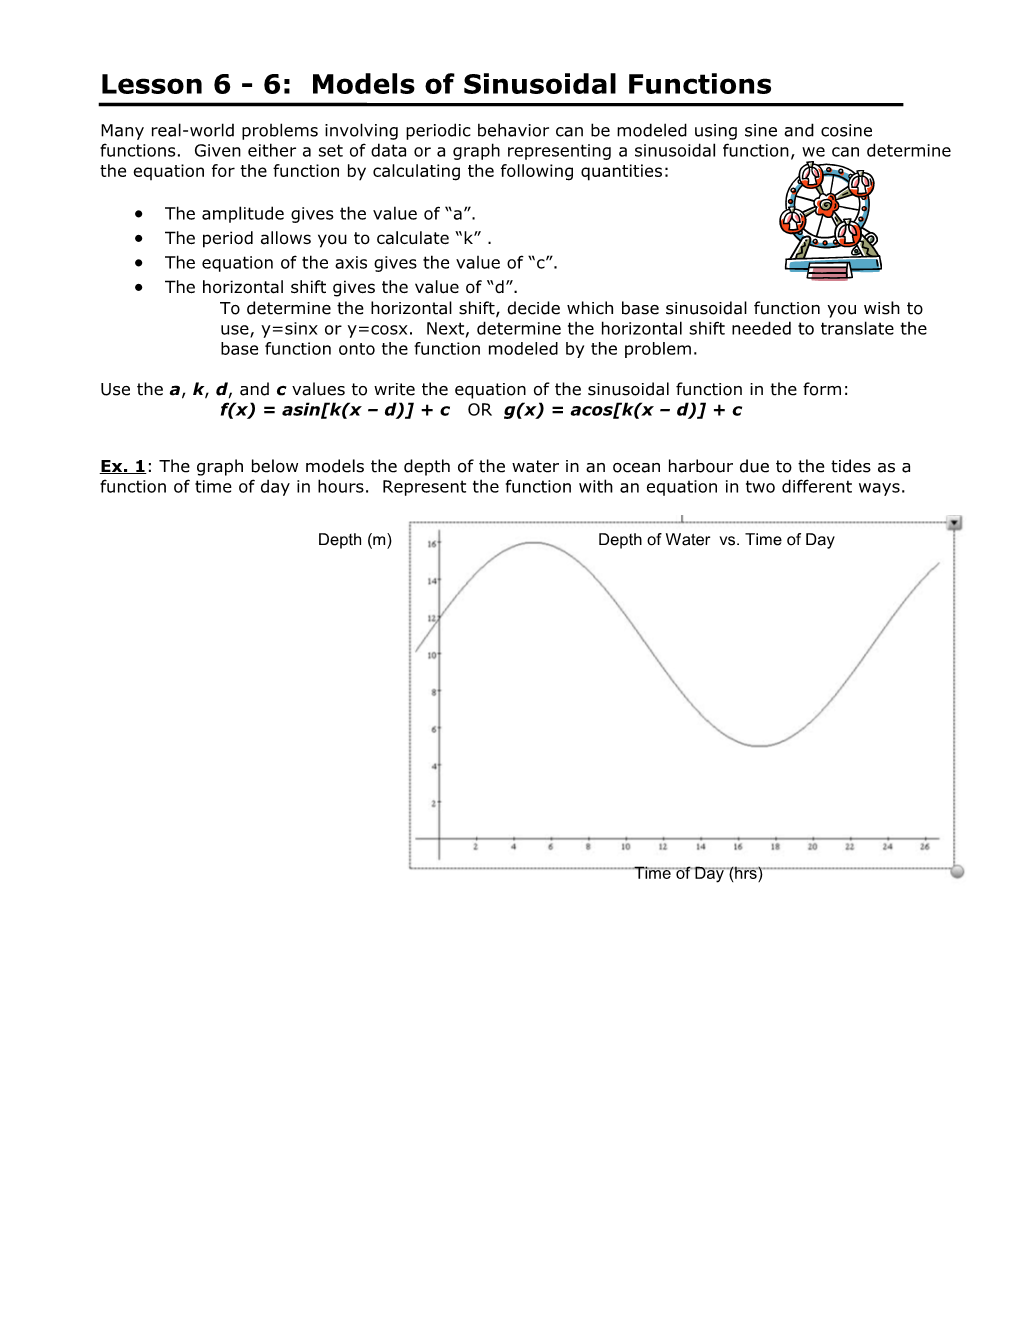 Lesson 6 - 6: Models of Sinusoidal Functions